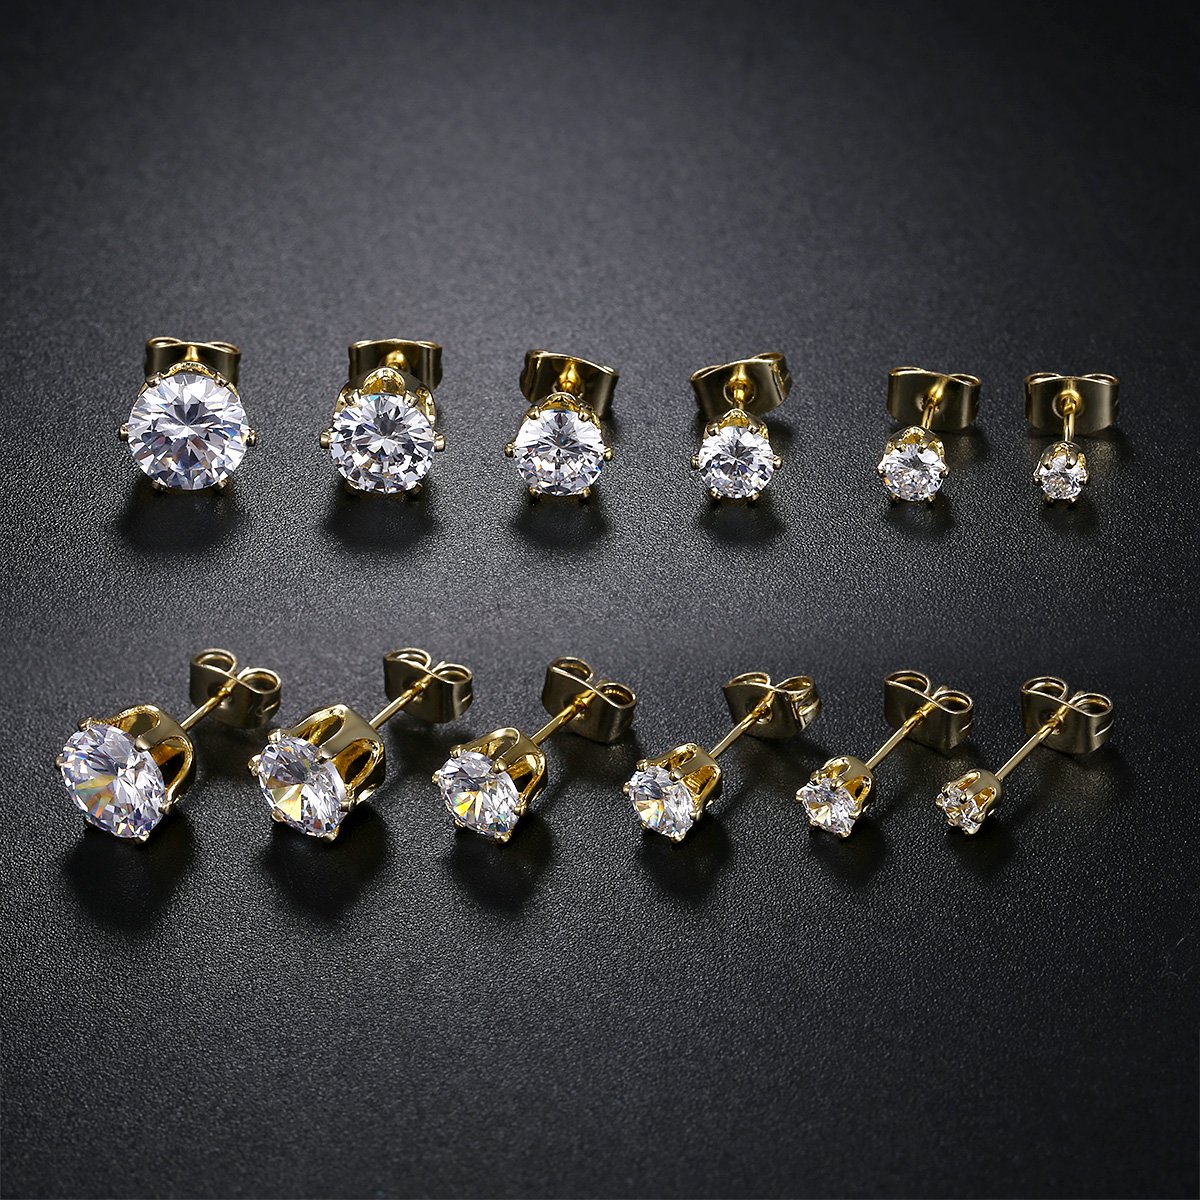 GEMSME 18K Yellow/White Gold Plated Round Cubic Zirconia Stud Earrings Pack of 6